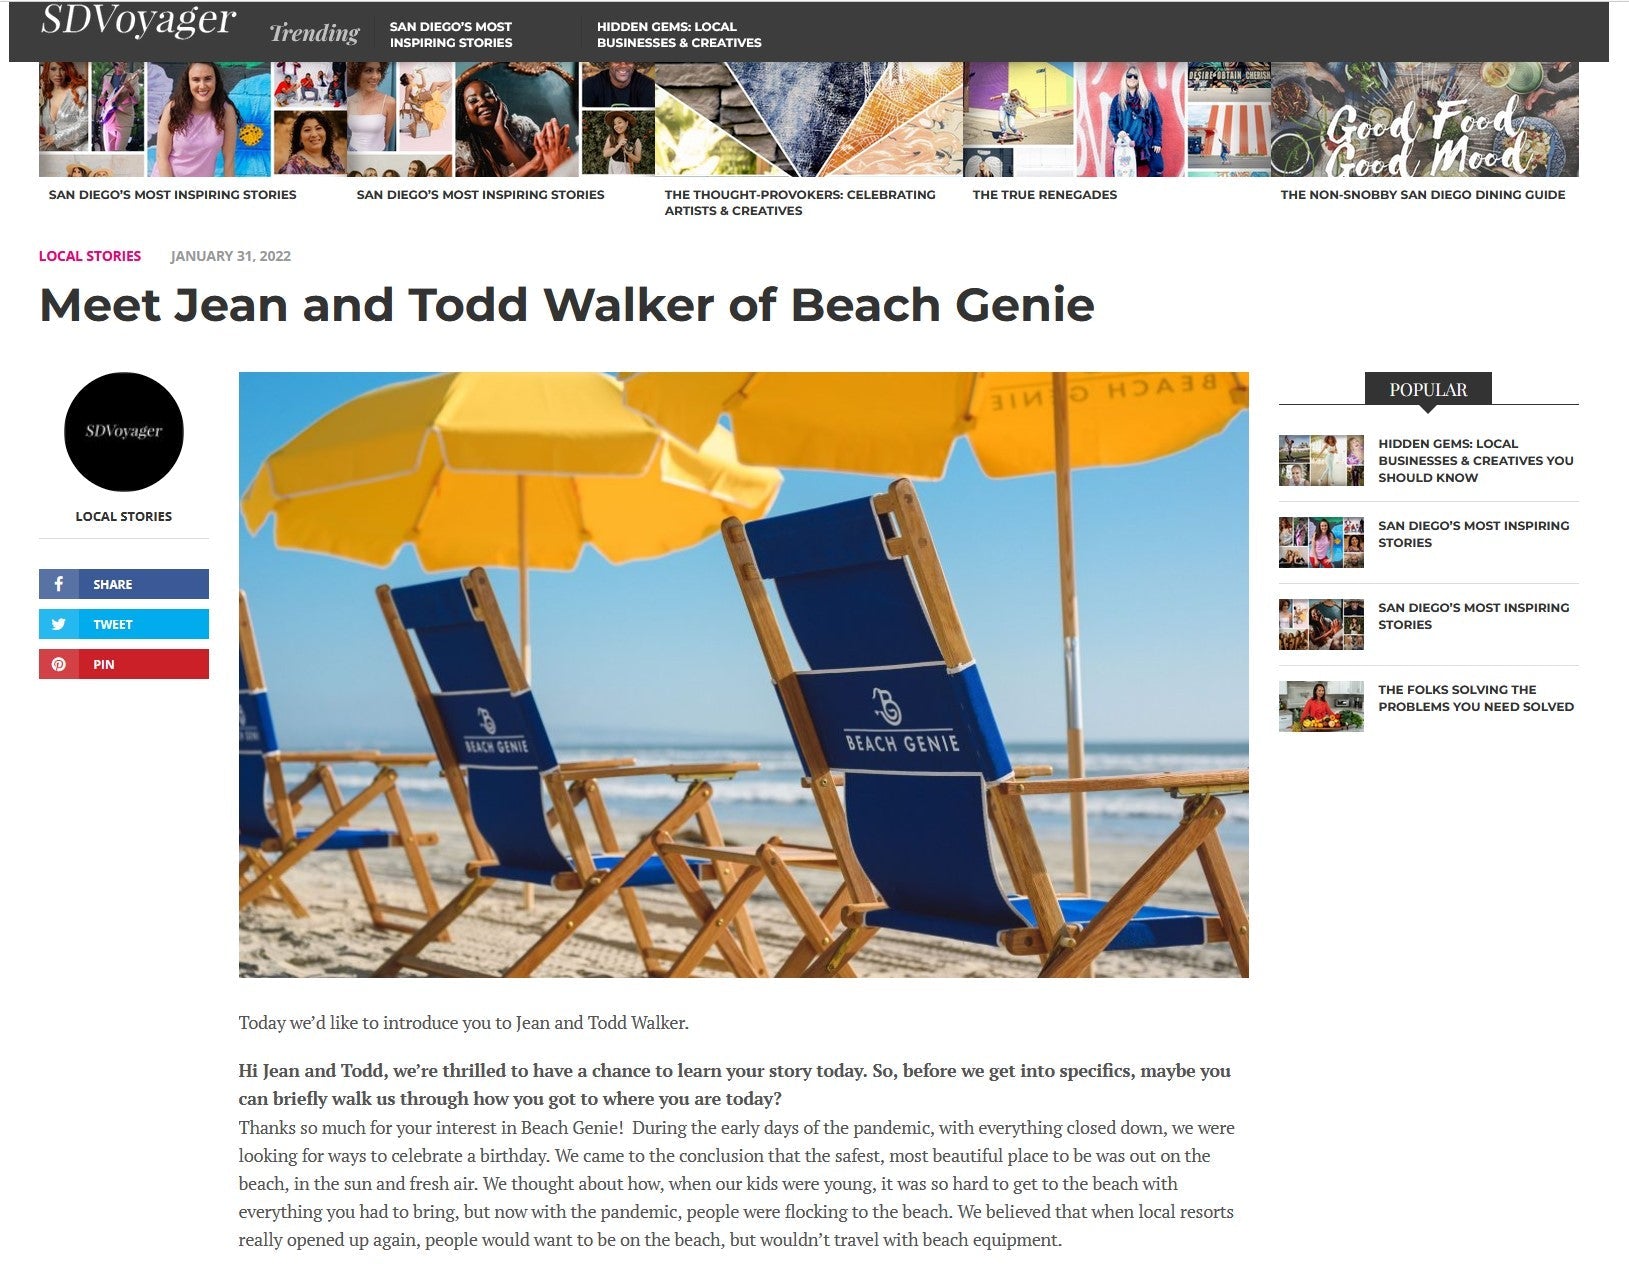 SD Voyager Gets to Know Jean & Todd Walker of Beach Genie